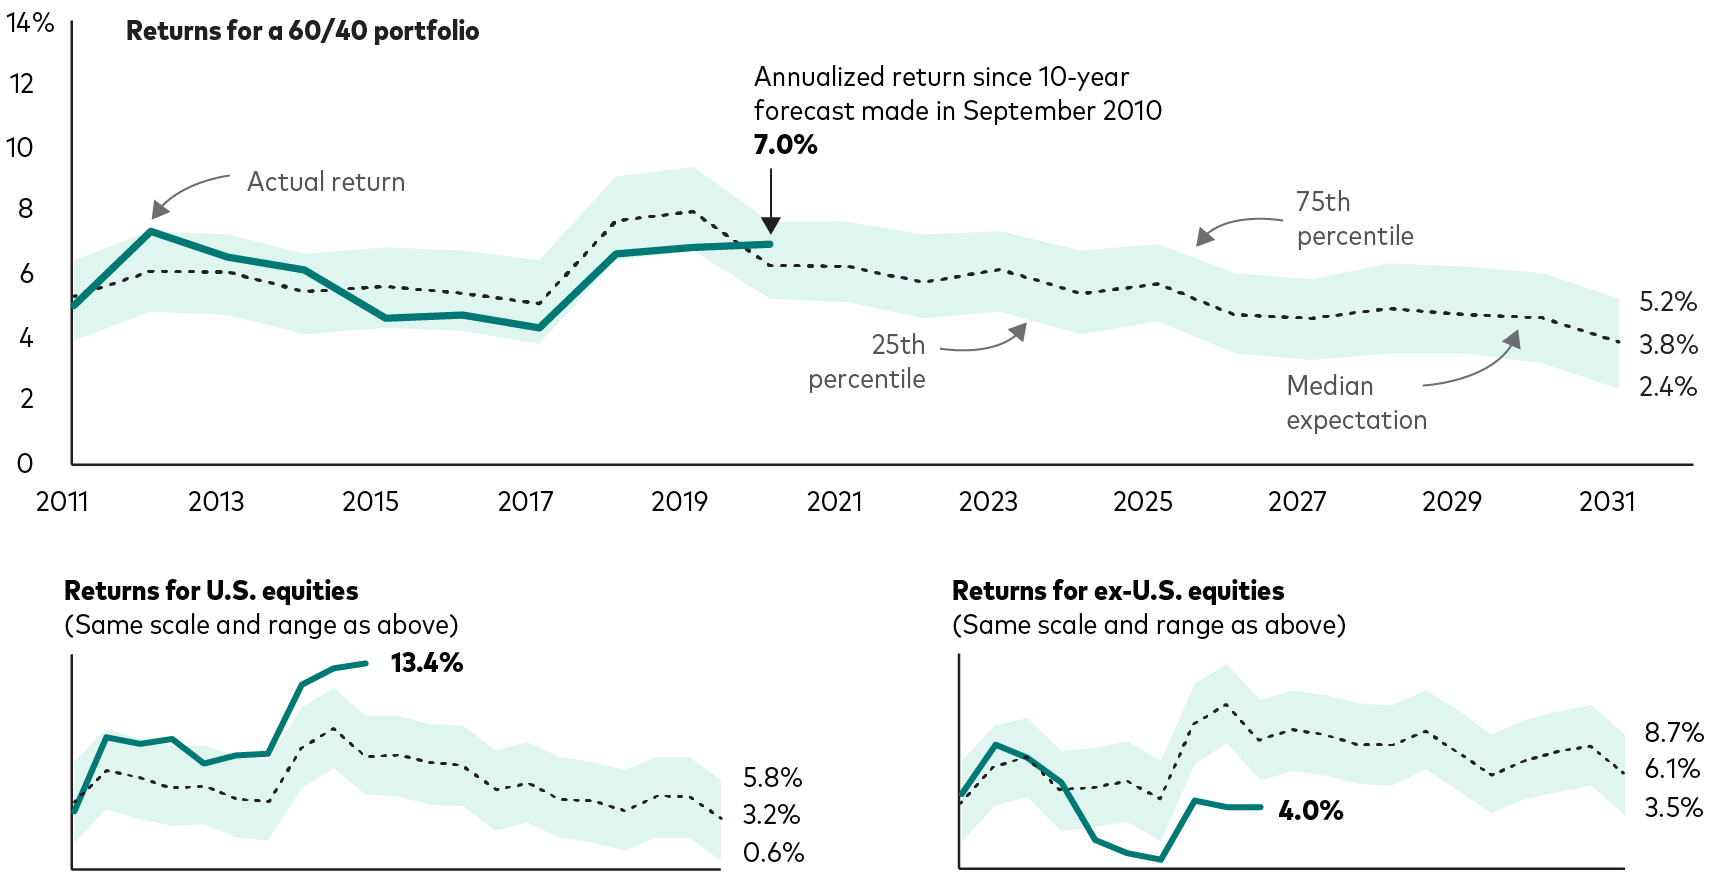 Three line charts show the forecast and realized 10-year annualized returns for, respectively, a 60% stock/40% bond portfolio, U.S. equities, and ex-U.S. equities (all U.S.-dollar denominated). They show that a 60/40 portfolio returned an annualized 7.0% over the 10 years ended September 30, 2020, and that Vanguard’s return  forecasts at the 25th, 50th, and 75th percentiles of Vanguard Capital Markets Model distributions are 2.4%, 3.8%, and 5.2%, respectively. U.S. equities returned an annualized 13.4% over the 10 years ended September 30, 2020. Vanguard’s return forecasts at the 25th, 50th, and 75th percentiles of Vanguard Capital Markets Model distributions are 0.6%, 3.2%, and 5.8%, respectively. Ex-U.S. equities returned an annualized 4.0% over the 10 years ended September 30, 2020. Vanguard’s return forecasts at the 25th, 50th, and 75th percentiles of Vanguard Capital Markets Model distributions are 3.5%, 6.1%, and 8.7%, respectively.